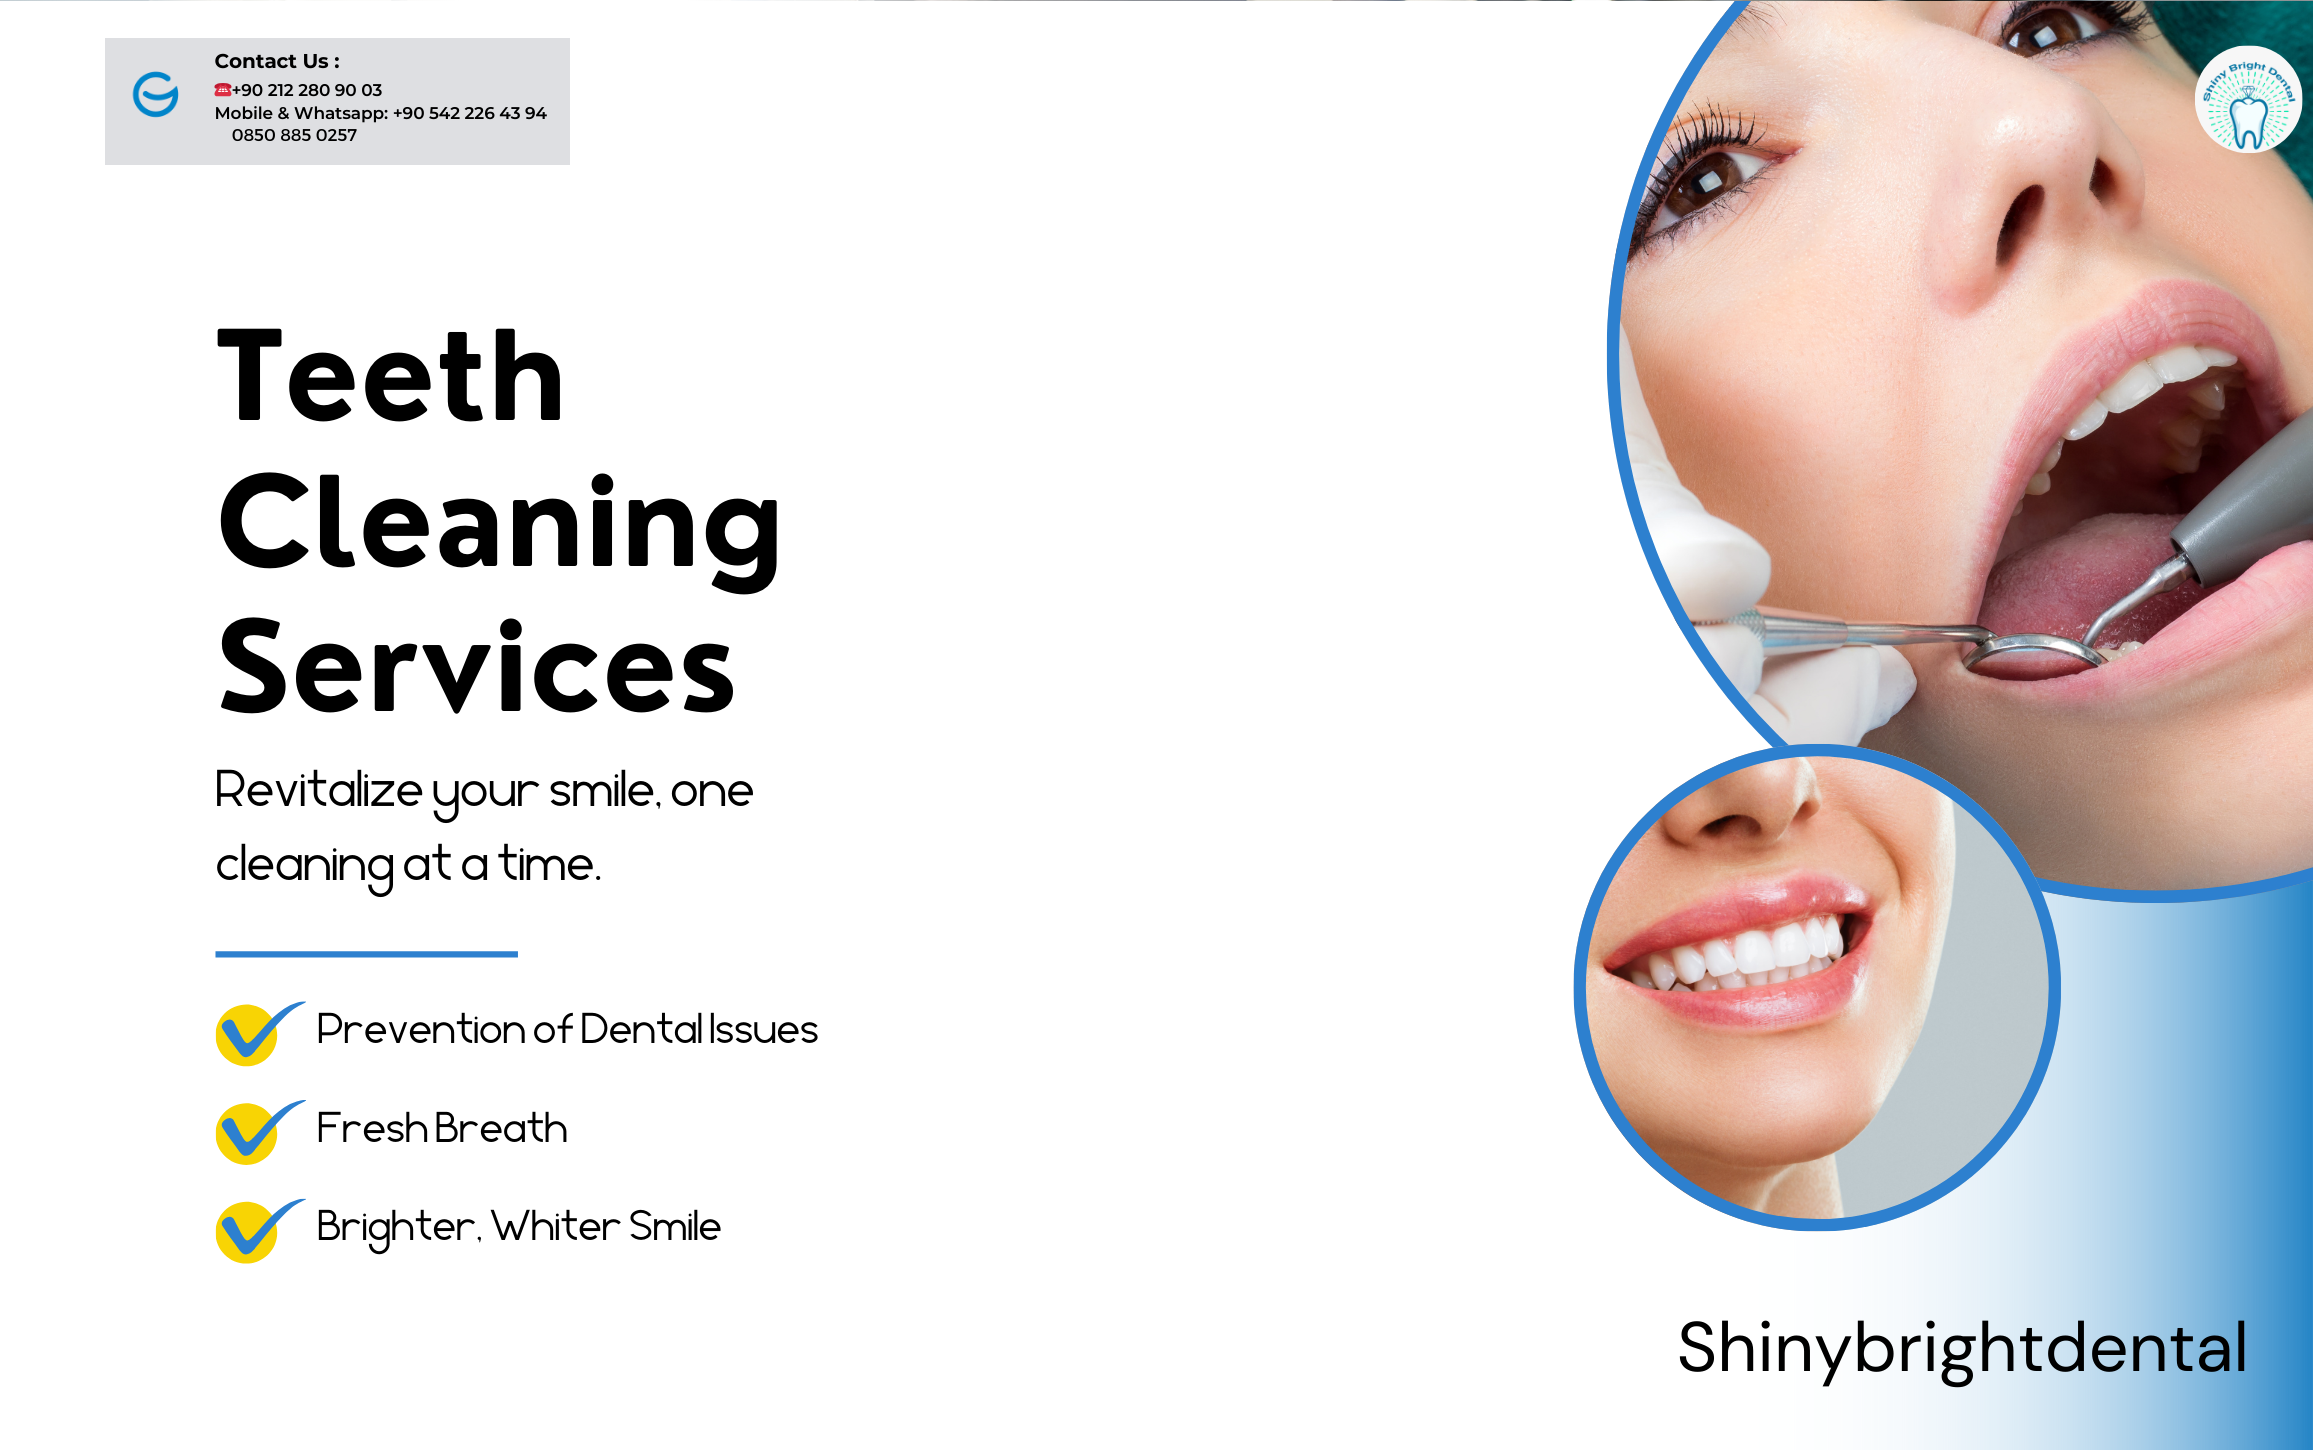 Revitalize Your Smile with Our Teeth Cleaning Services